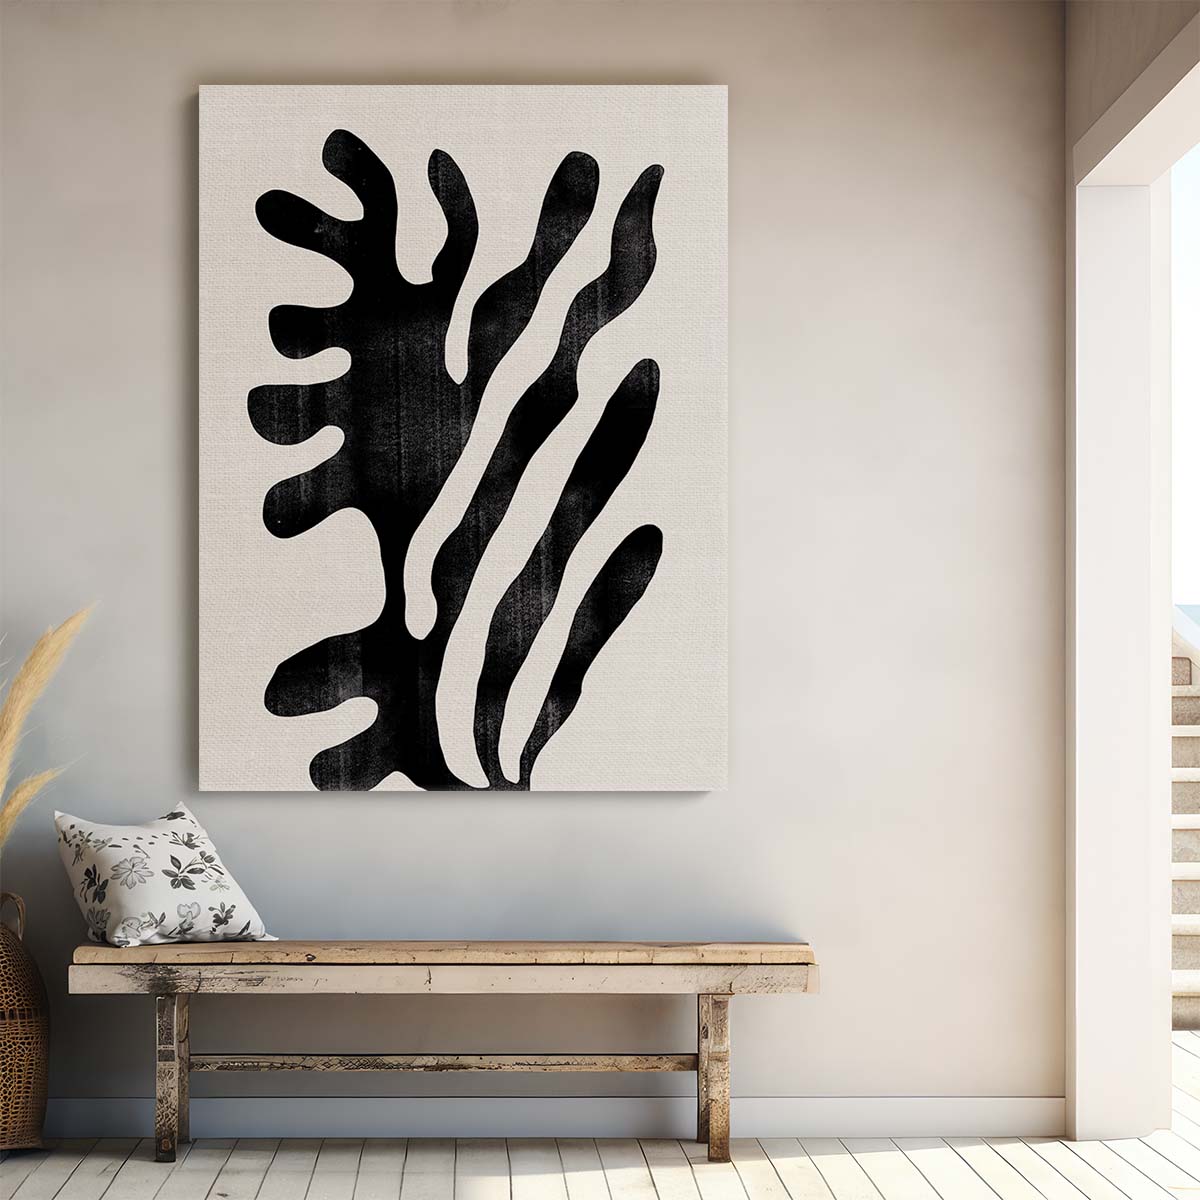 Mid-Century Abstract Organic Sea-Weed Illustration Art by Miuus Studio by Luxuriance Designs, made in USA